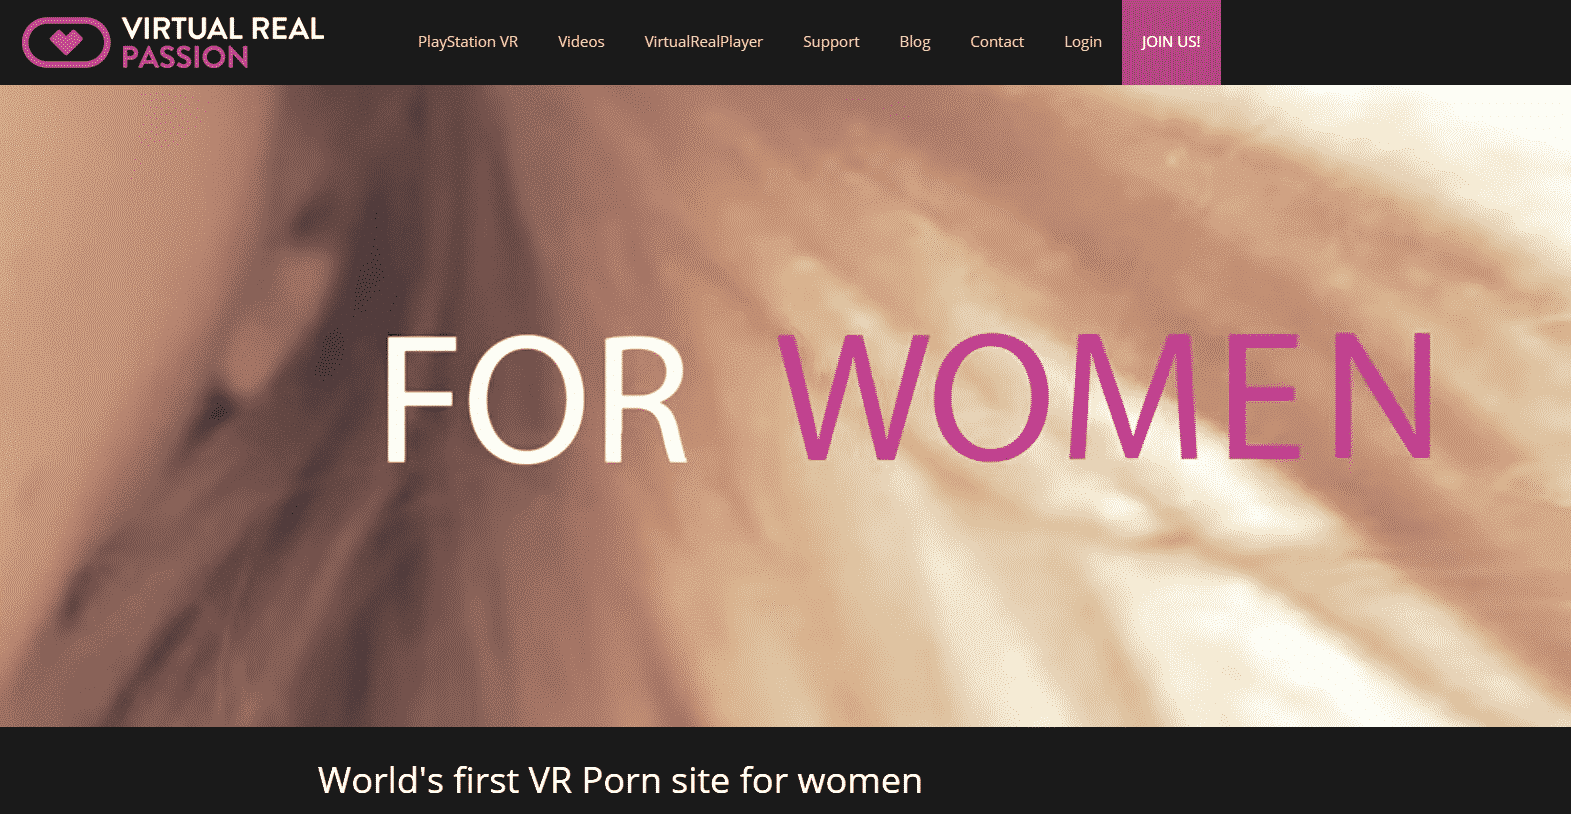 VirtualRealFashion launches as first VR site for women.